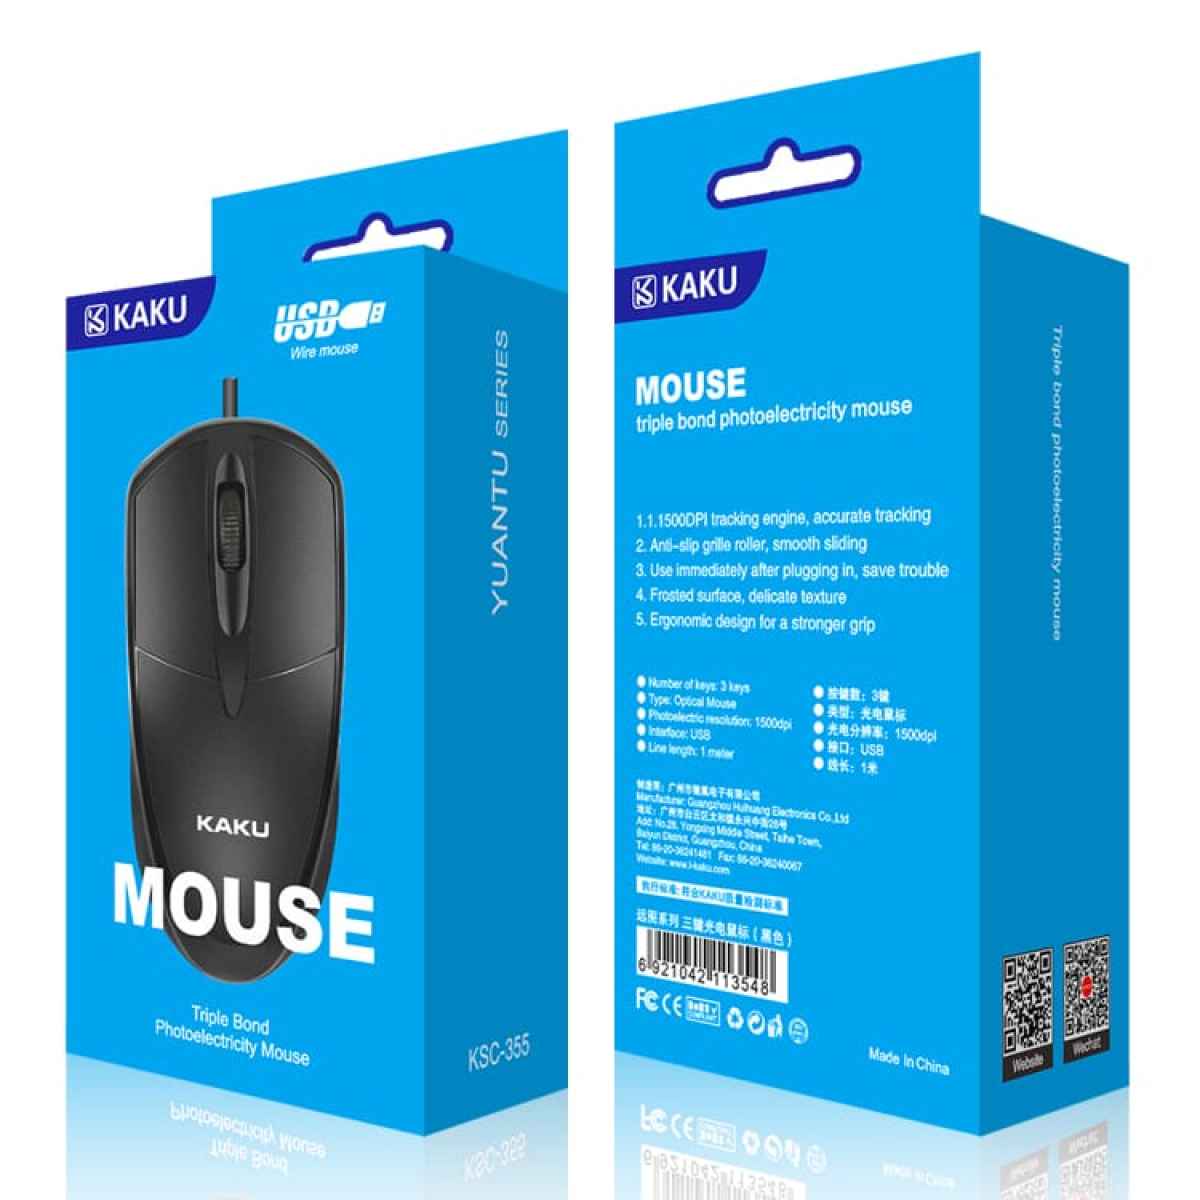 Kaku KSC-355 Wired Mouse Good For Computer PC and Laptop